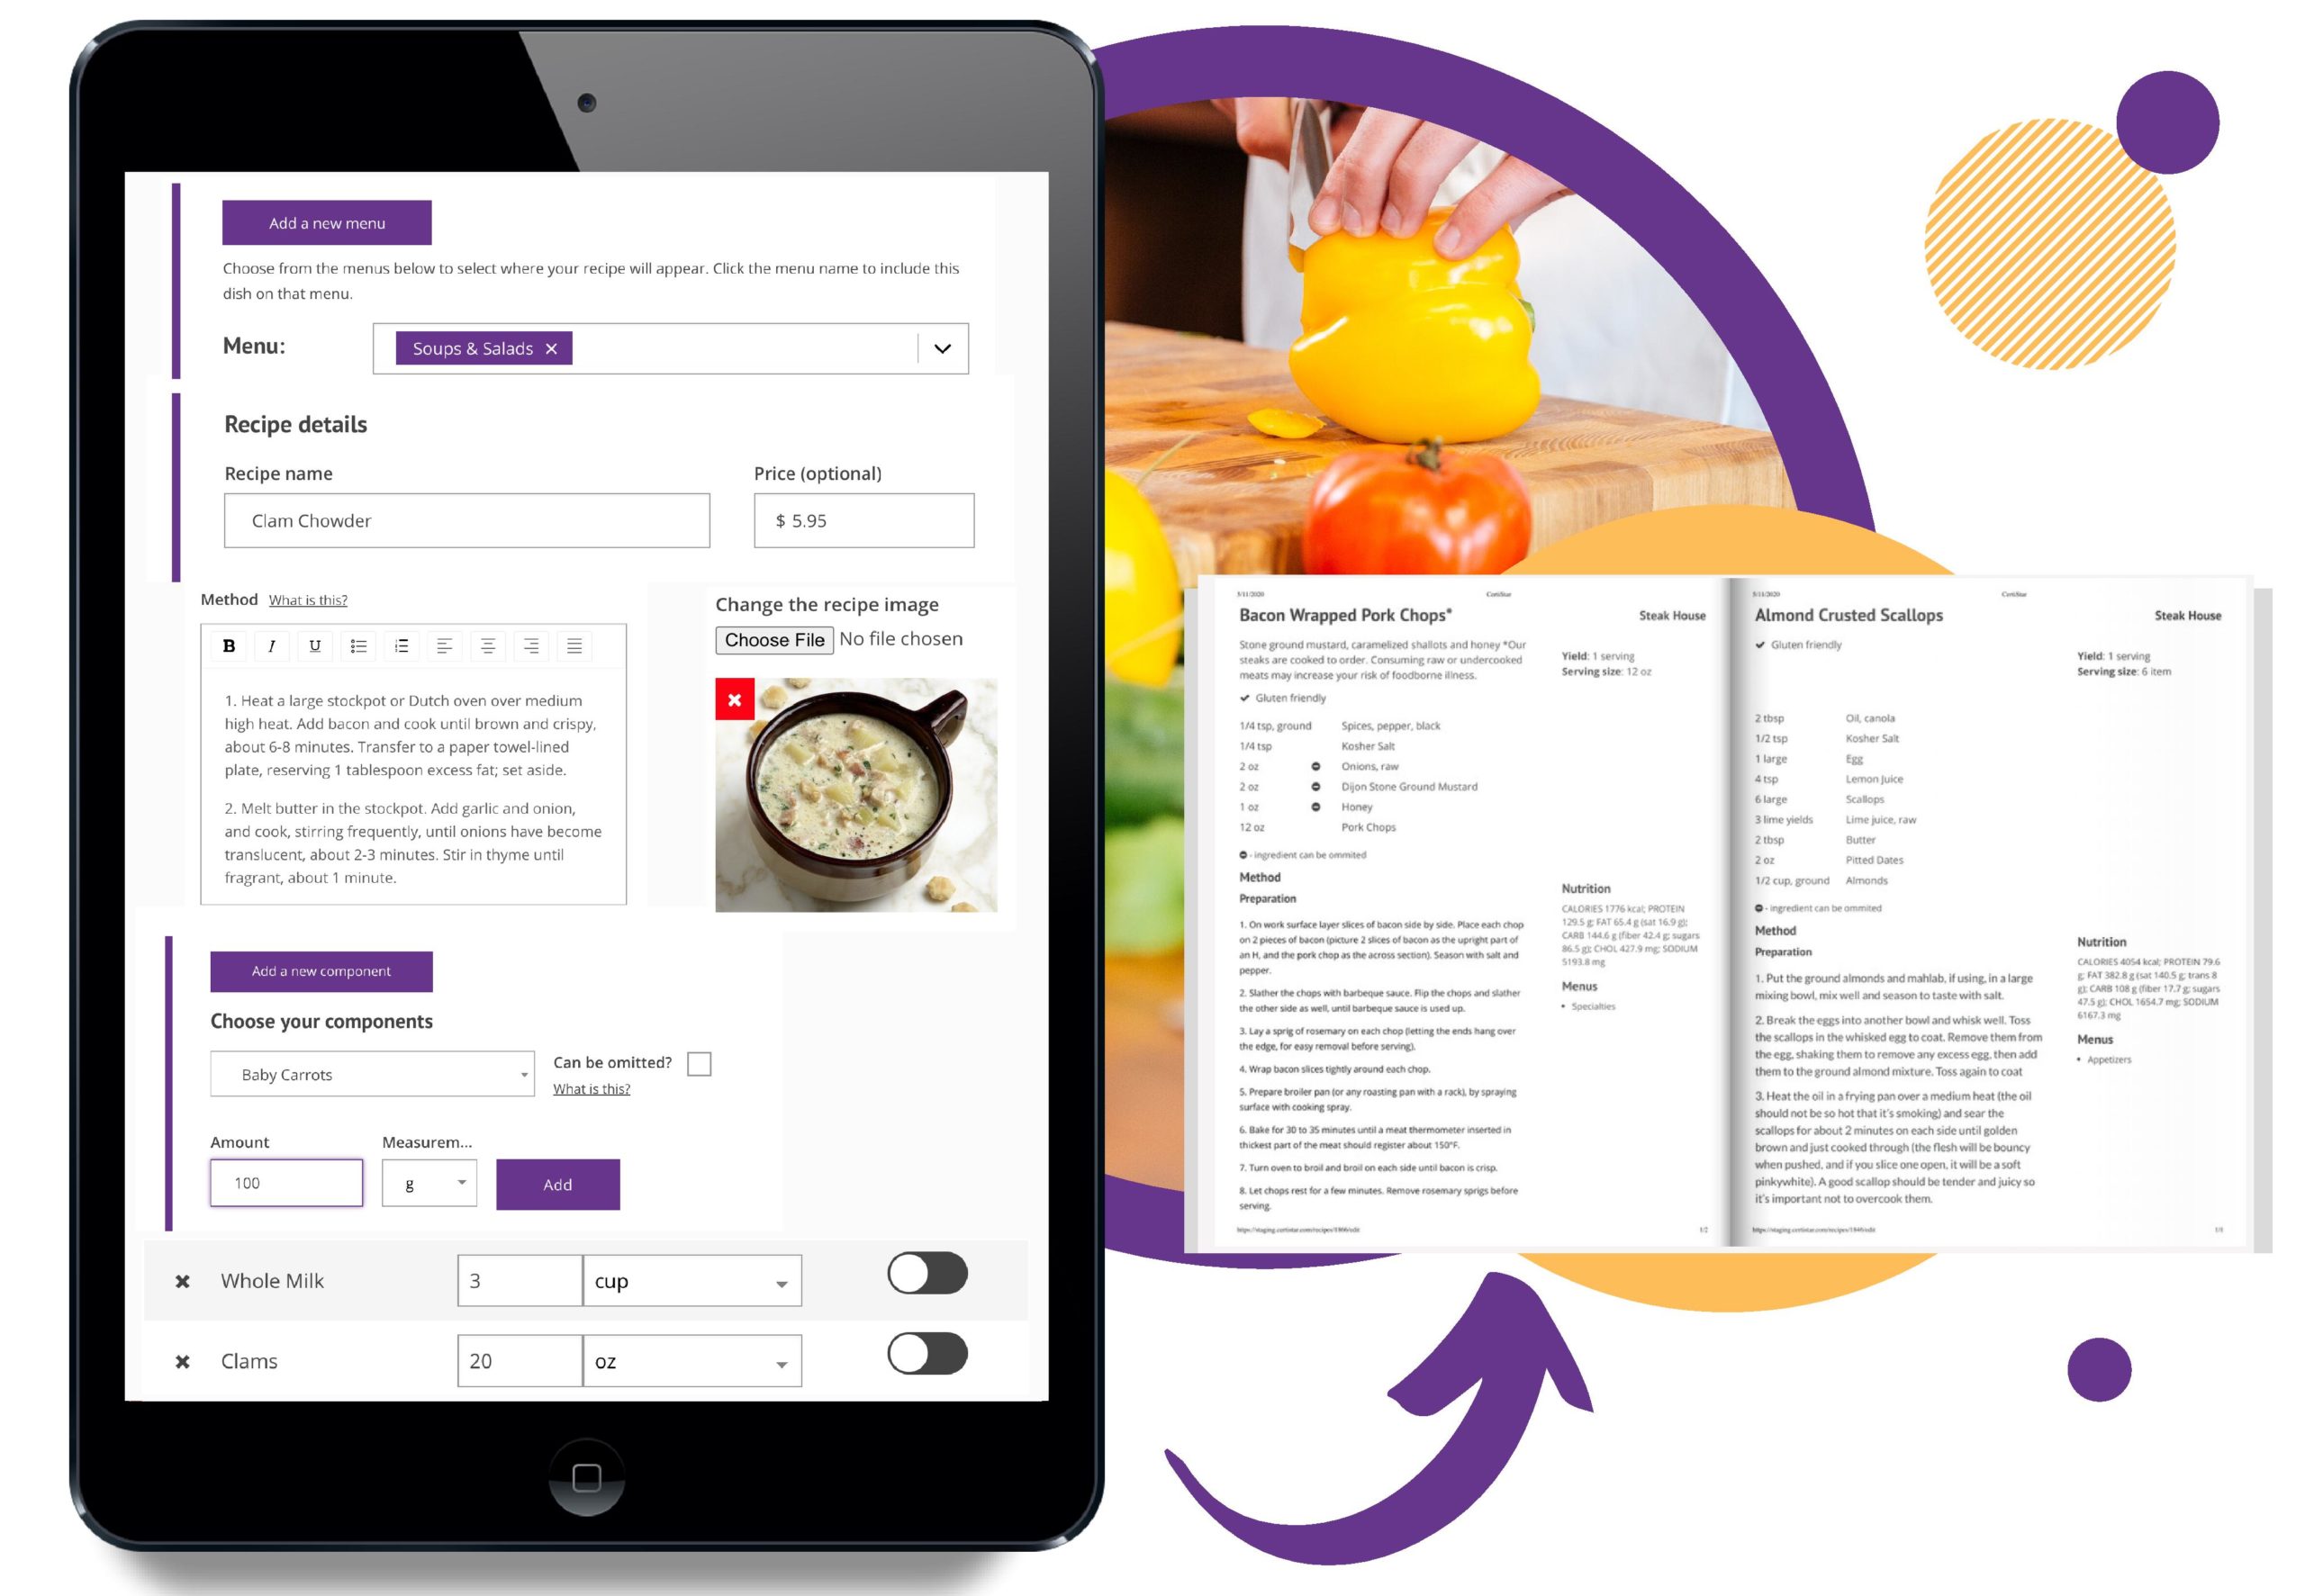 How to Organize Recipes: Paper and Digital Options